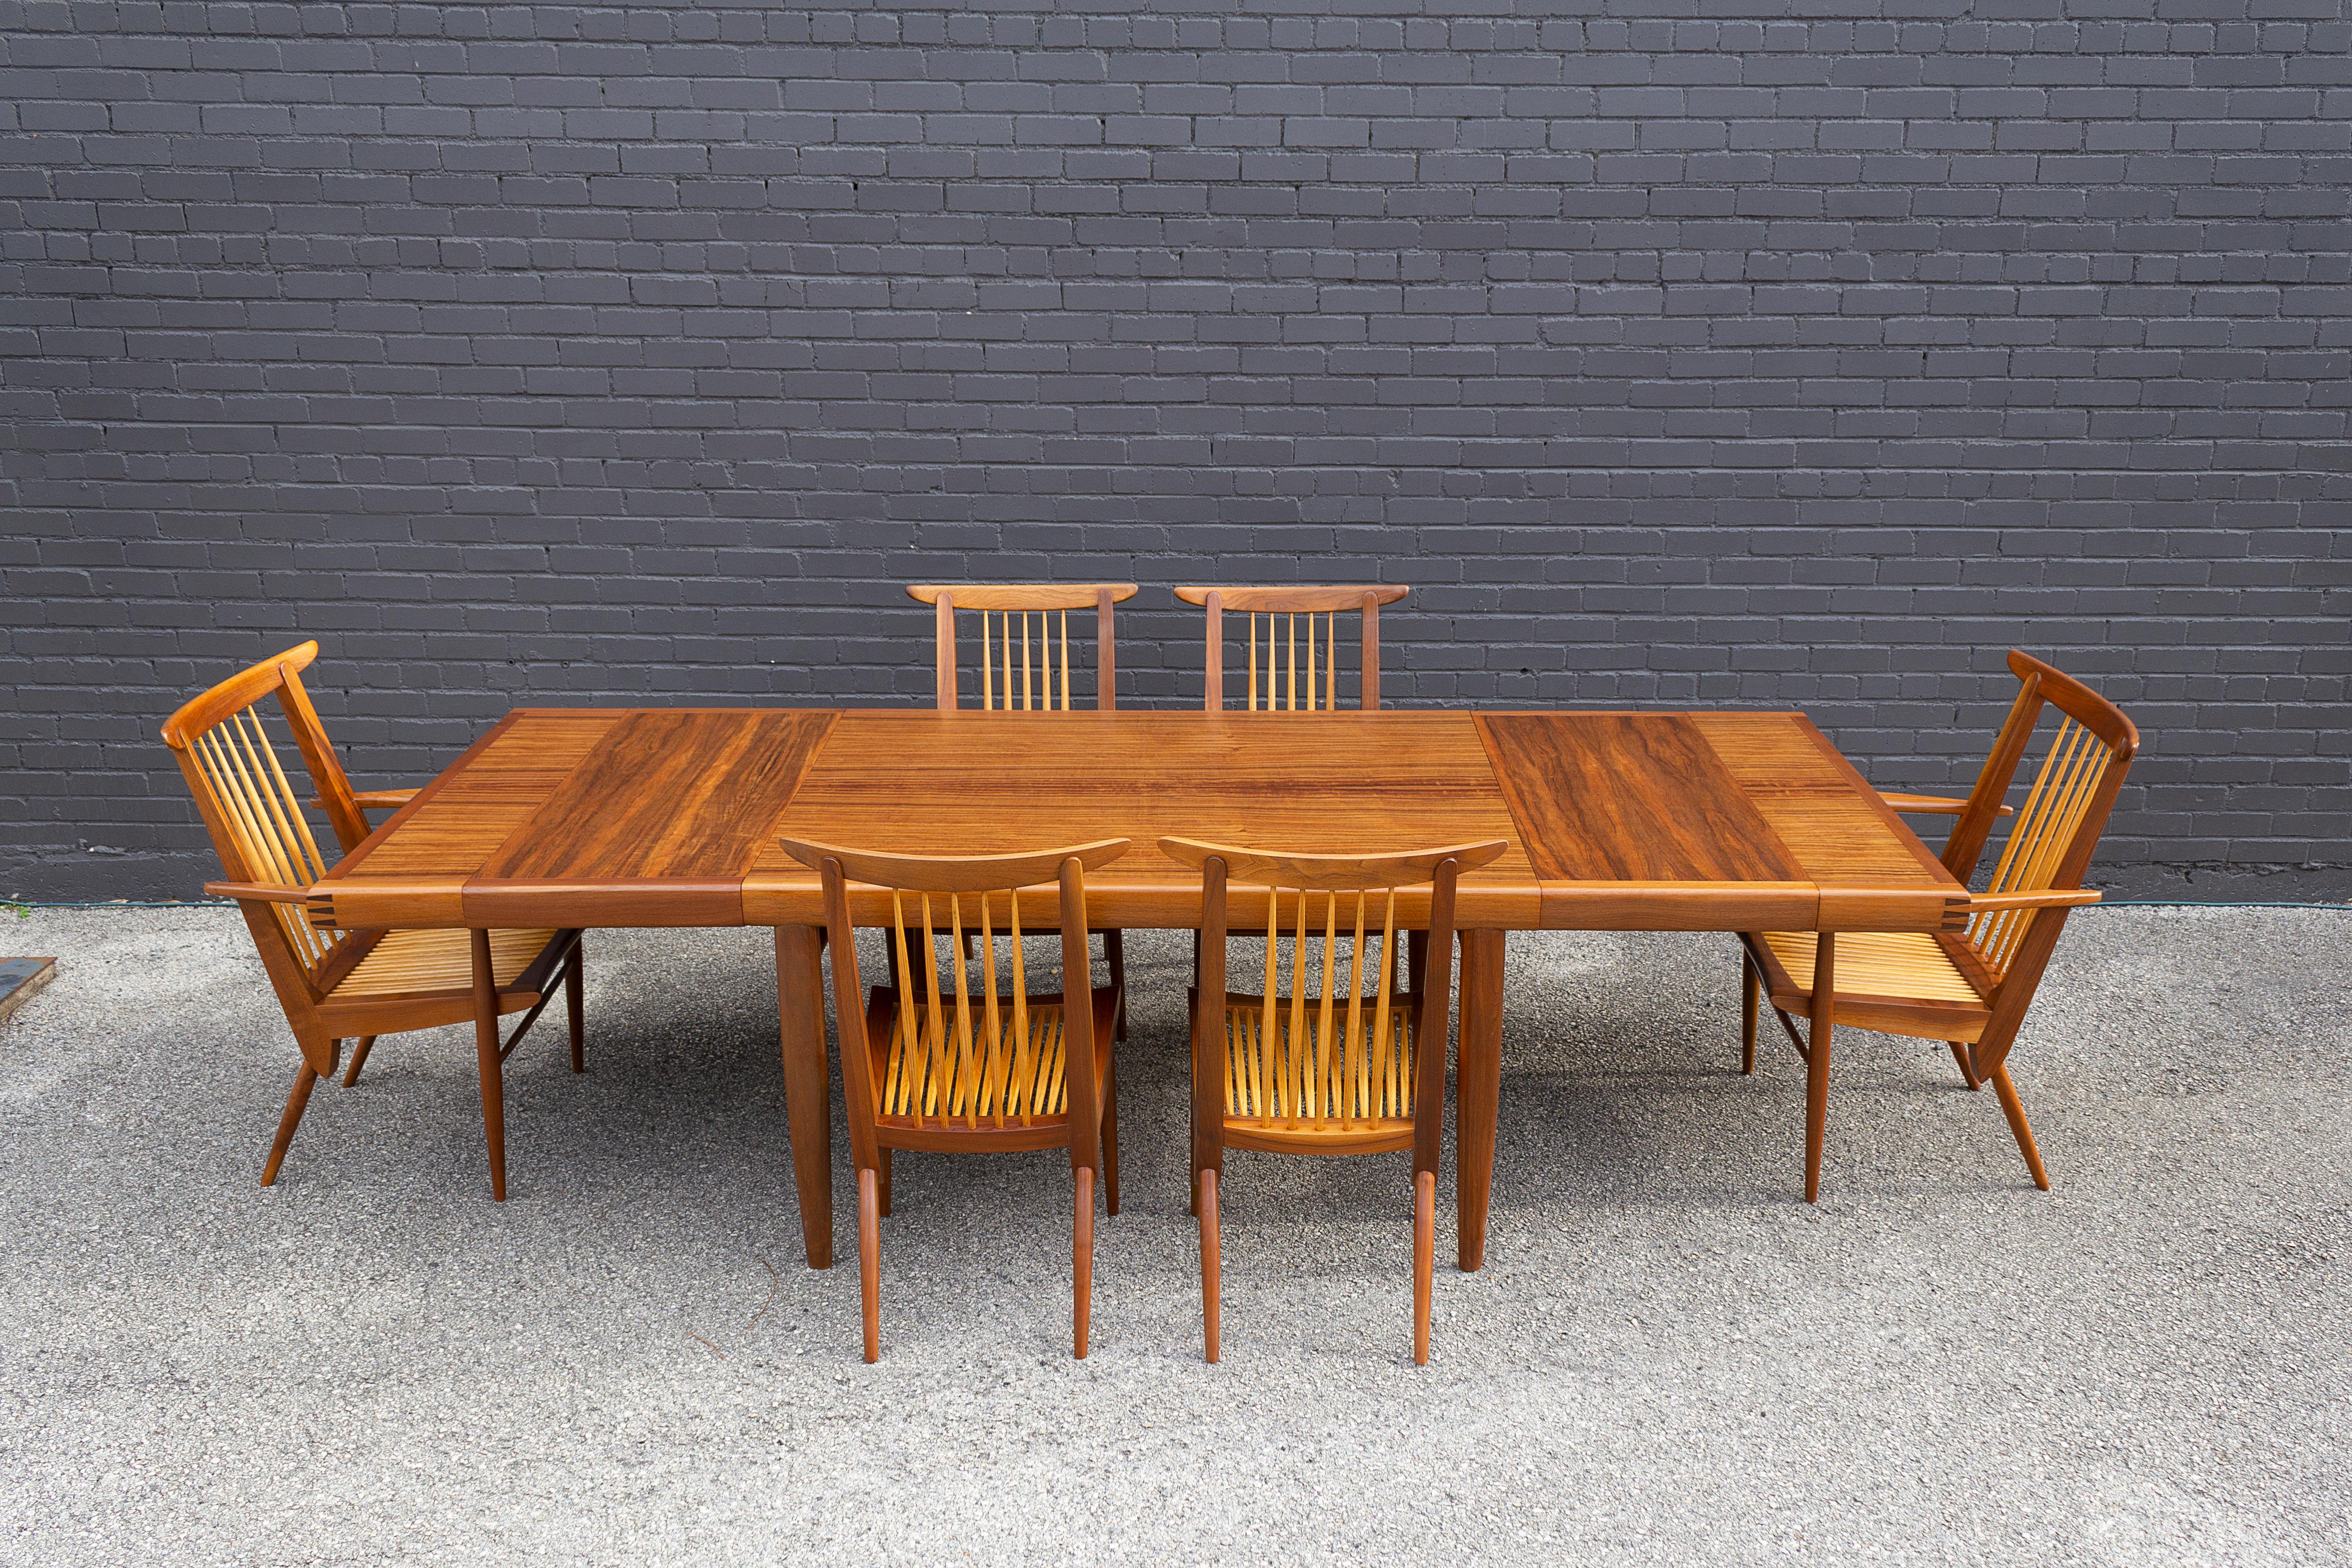 This is a rare and complete George Nakashima Origins Collection dining room set.
The set includes two #259w armchairs, four #259w side chairs, the model #203 dining table, and two matching extensions. The table retains the original Widdicomb label